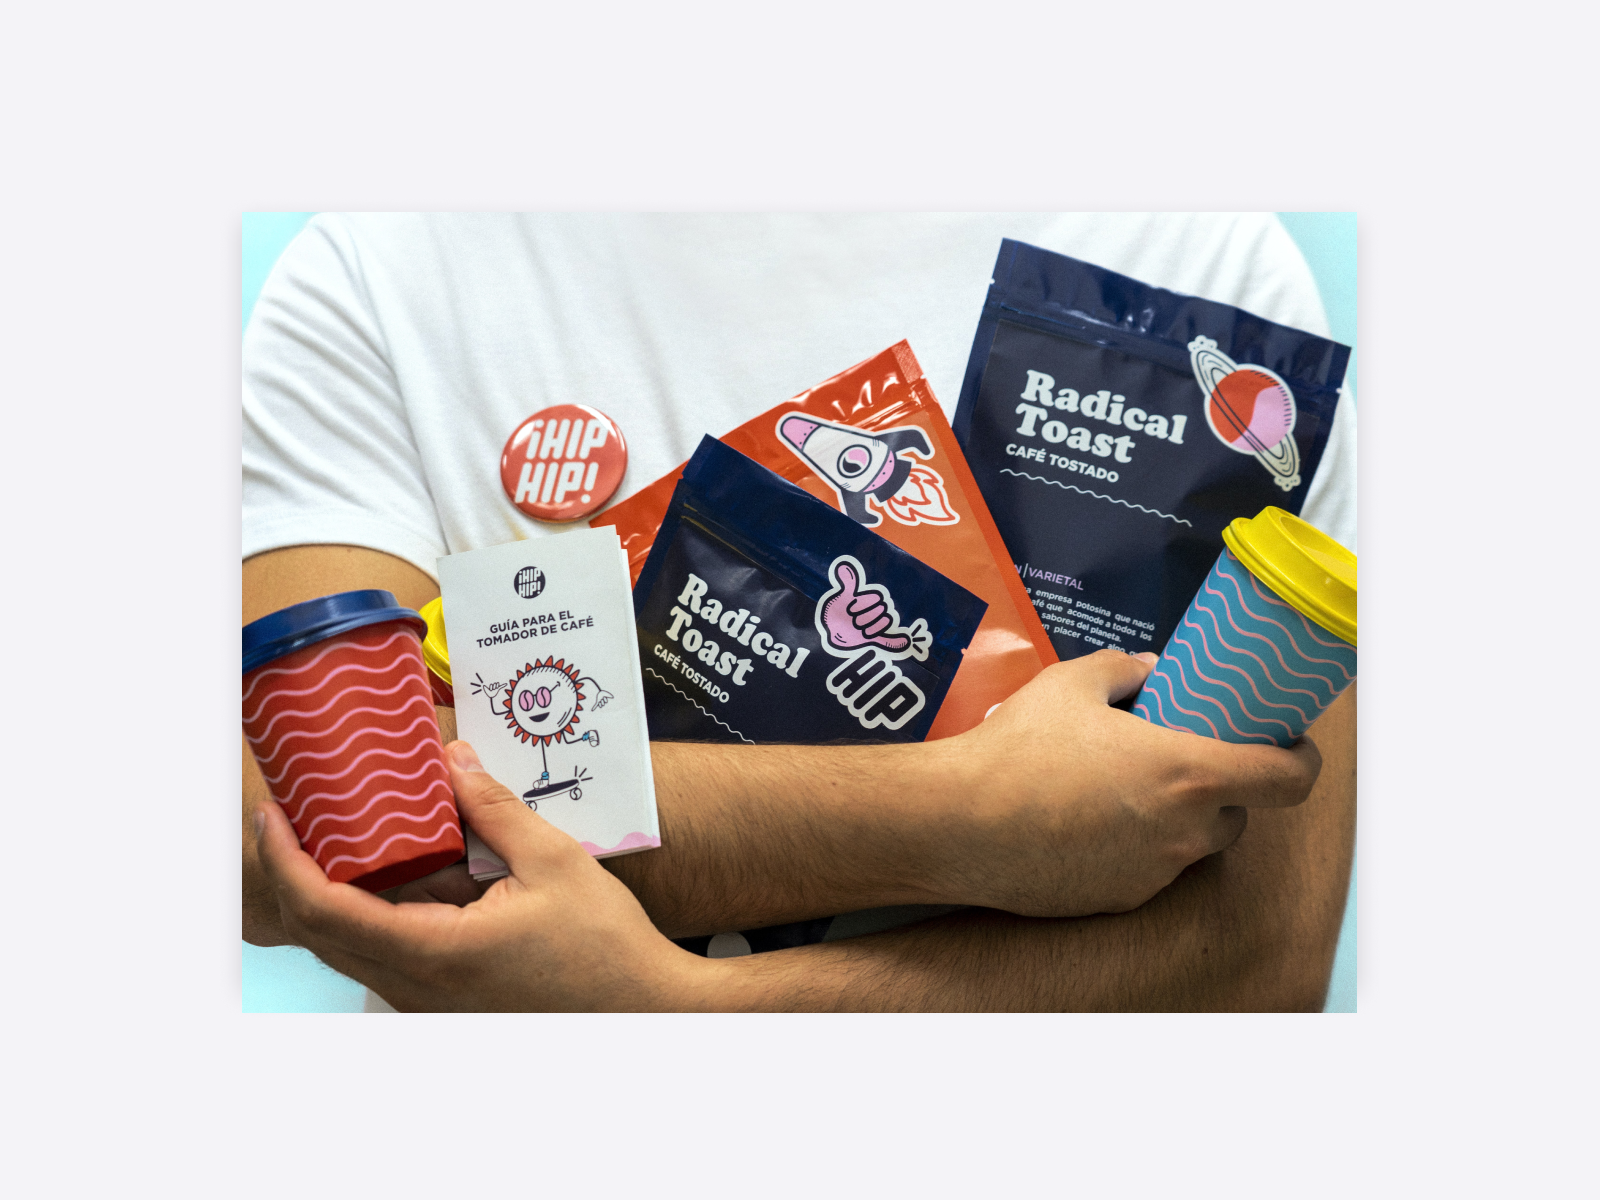 A man holding various products, including cups and packs of toast. Every package has a bright and playful design.